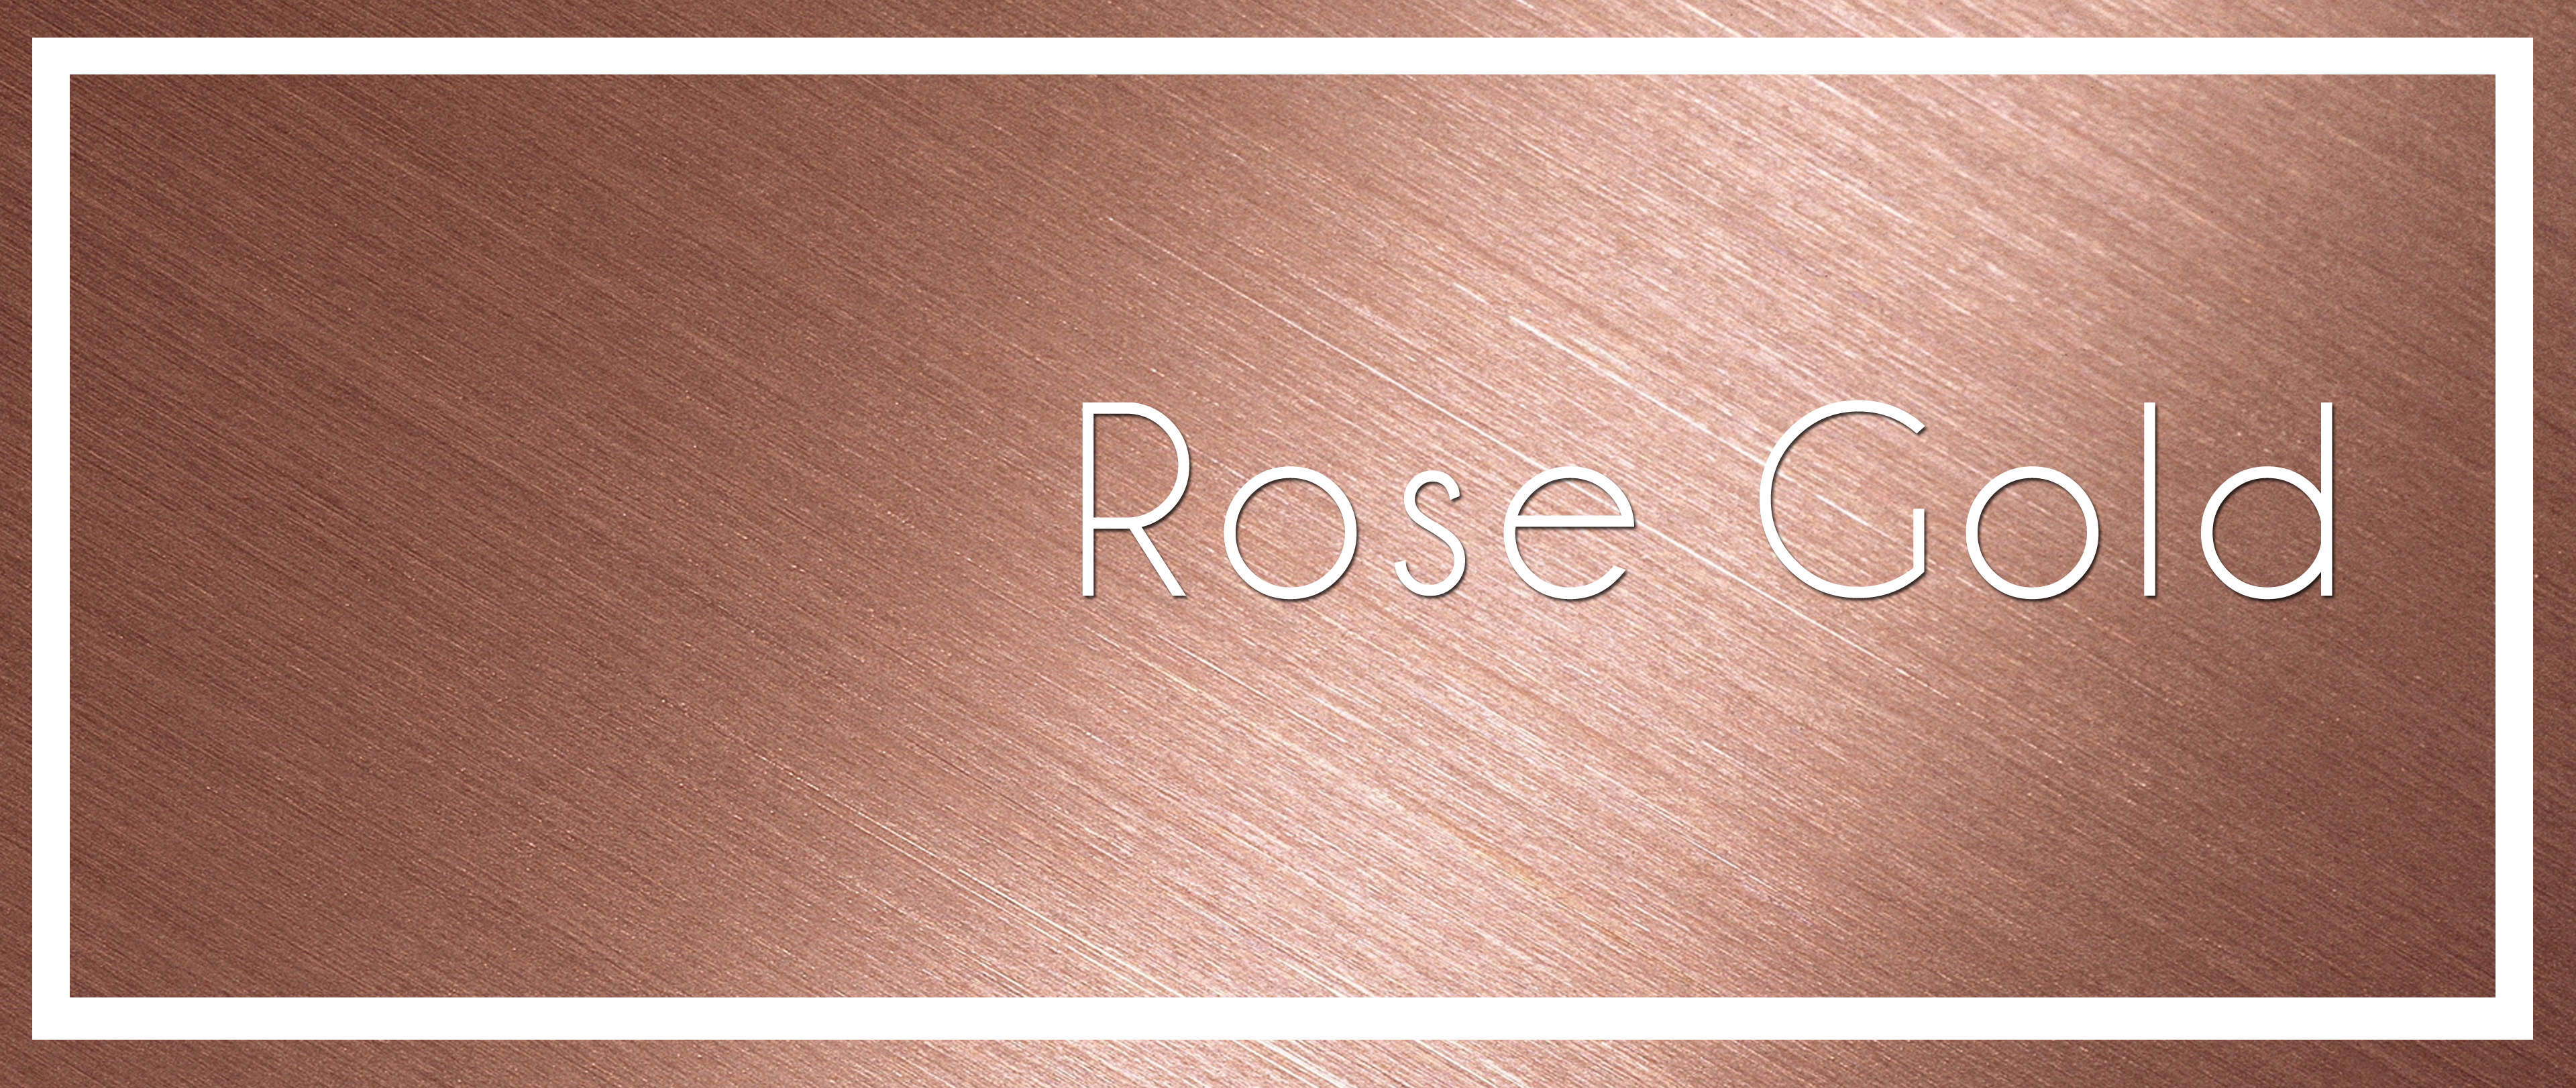 Metal texture pink gold gold and rose gold gradients metalic rose gold...